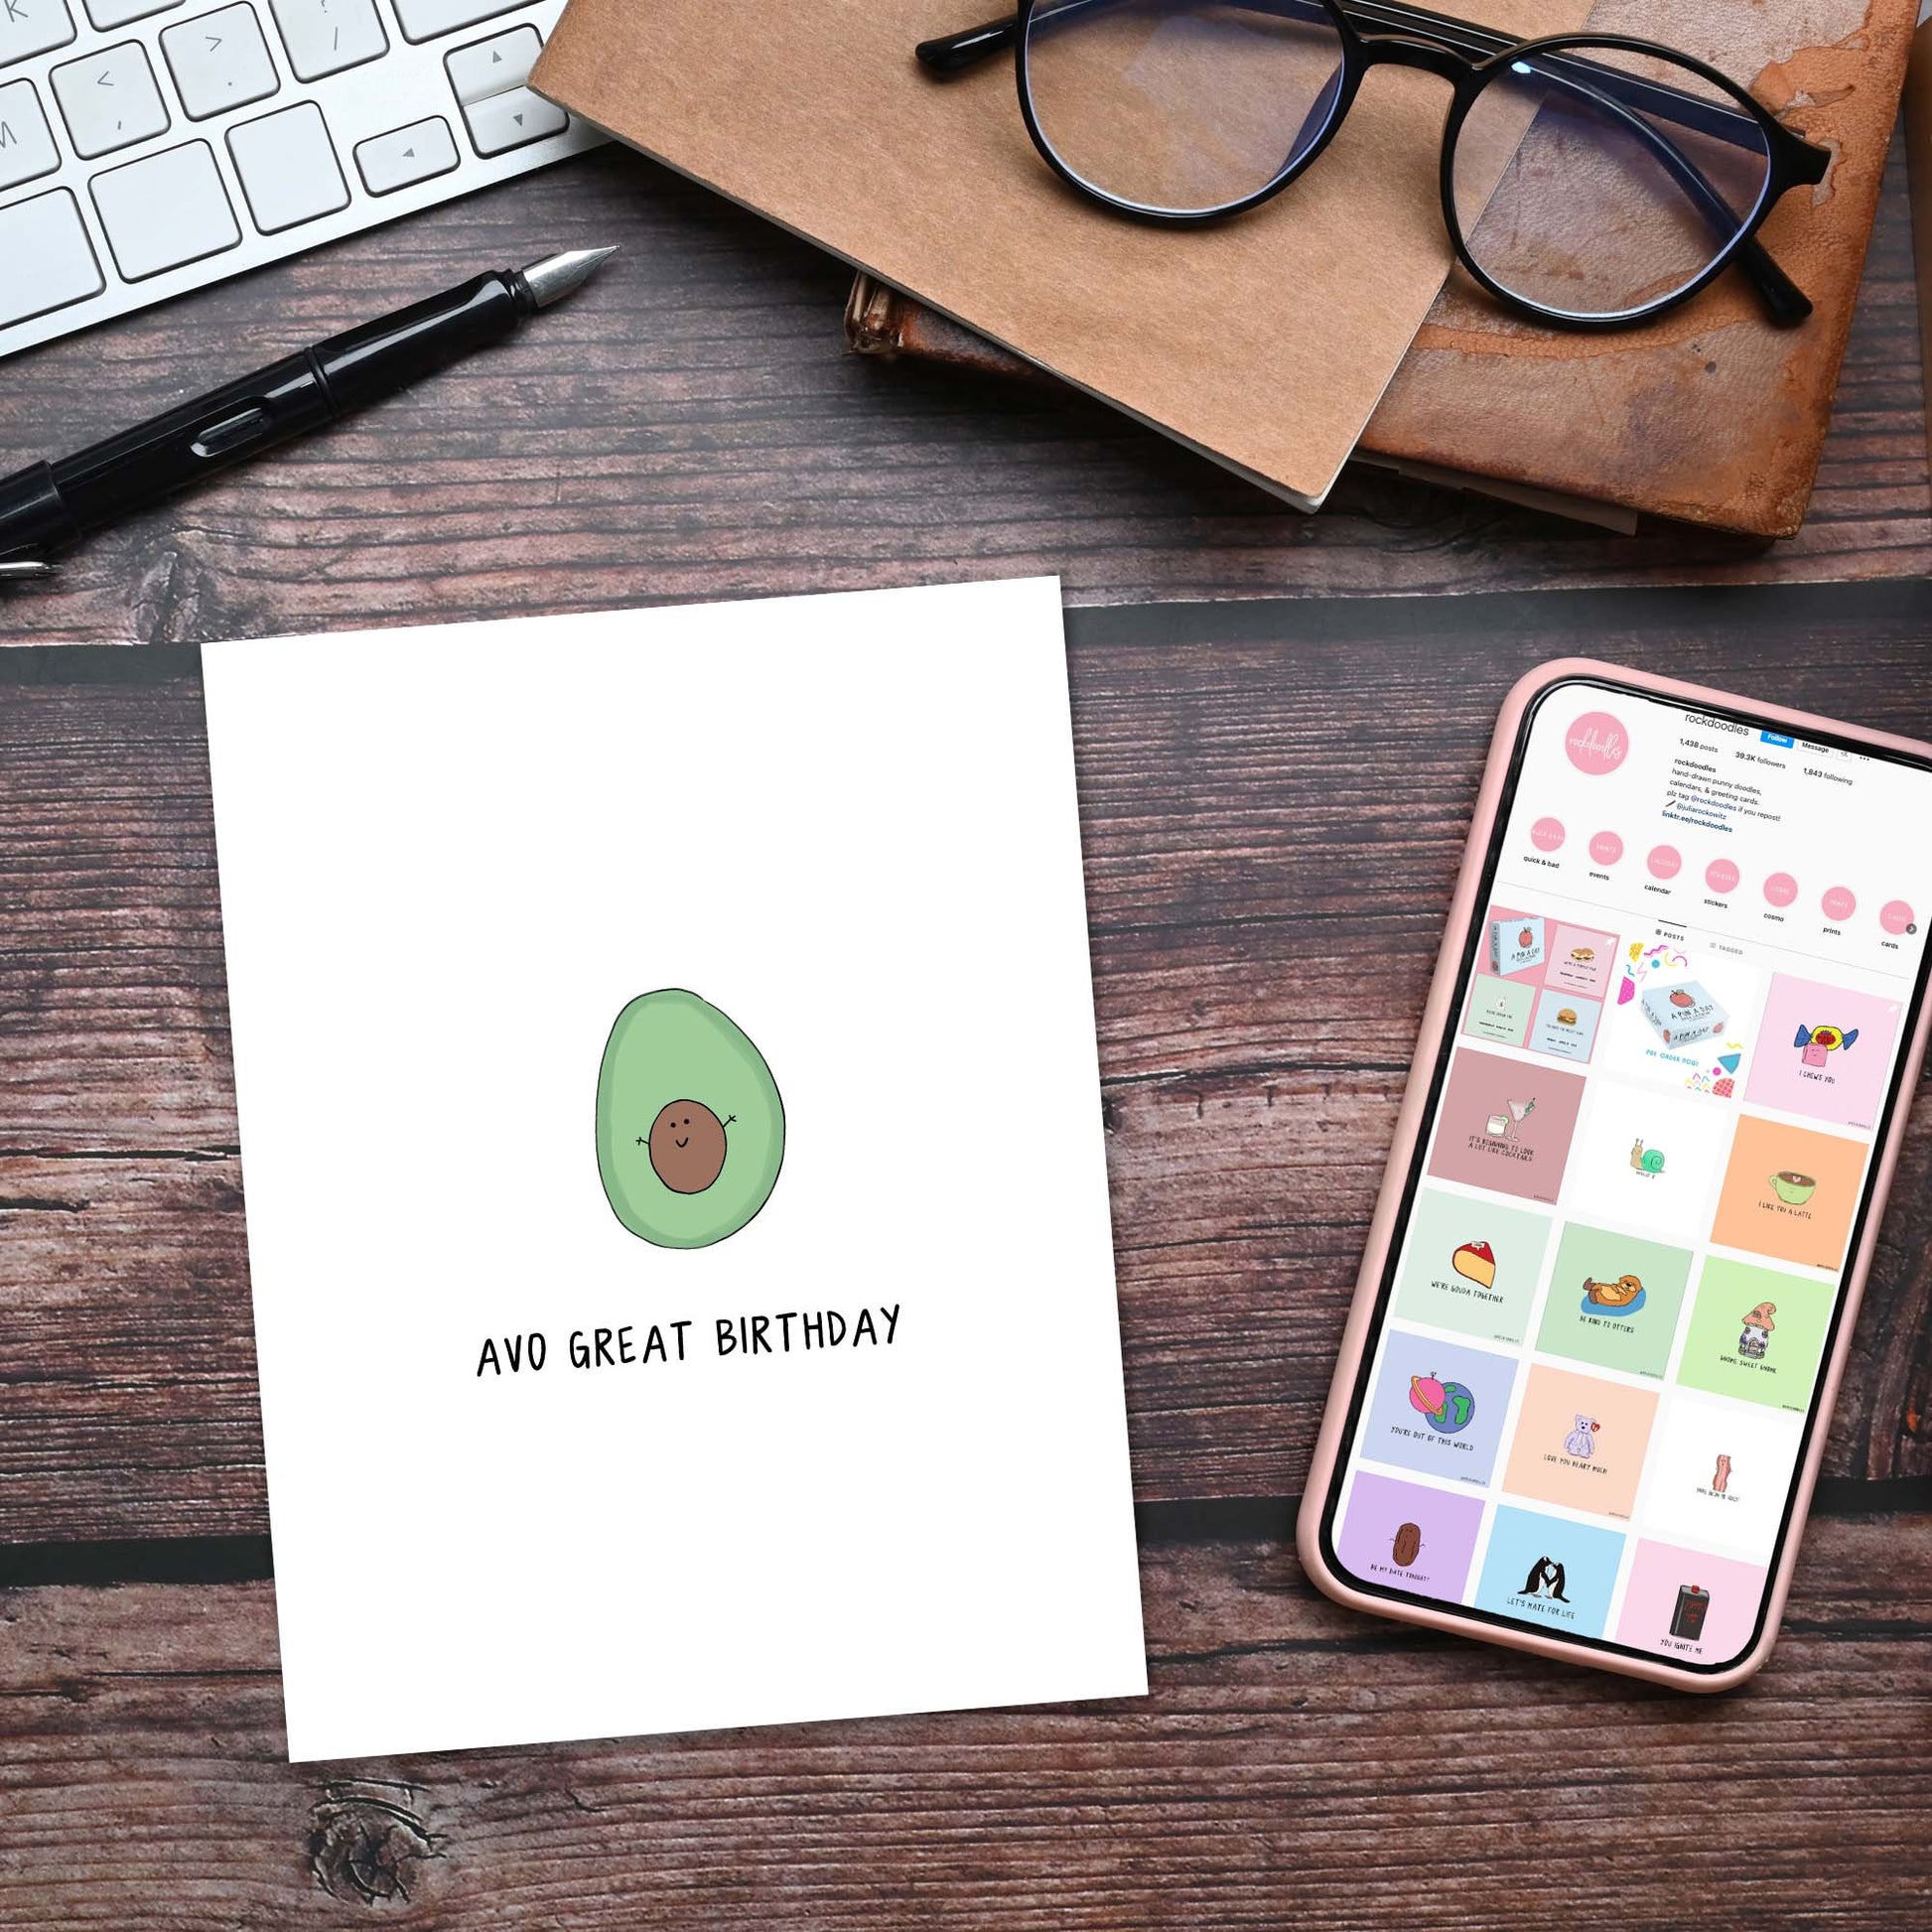 A birthday card with an avocado on it and a phone next to it. The perfect rockdoodles Avo Great Birthday Card birthday surprise!